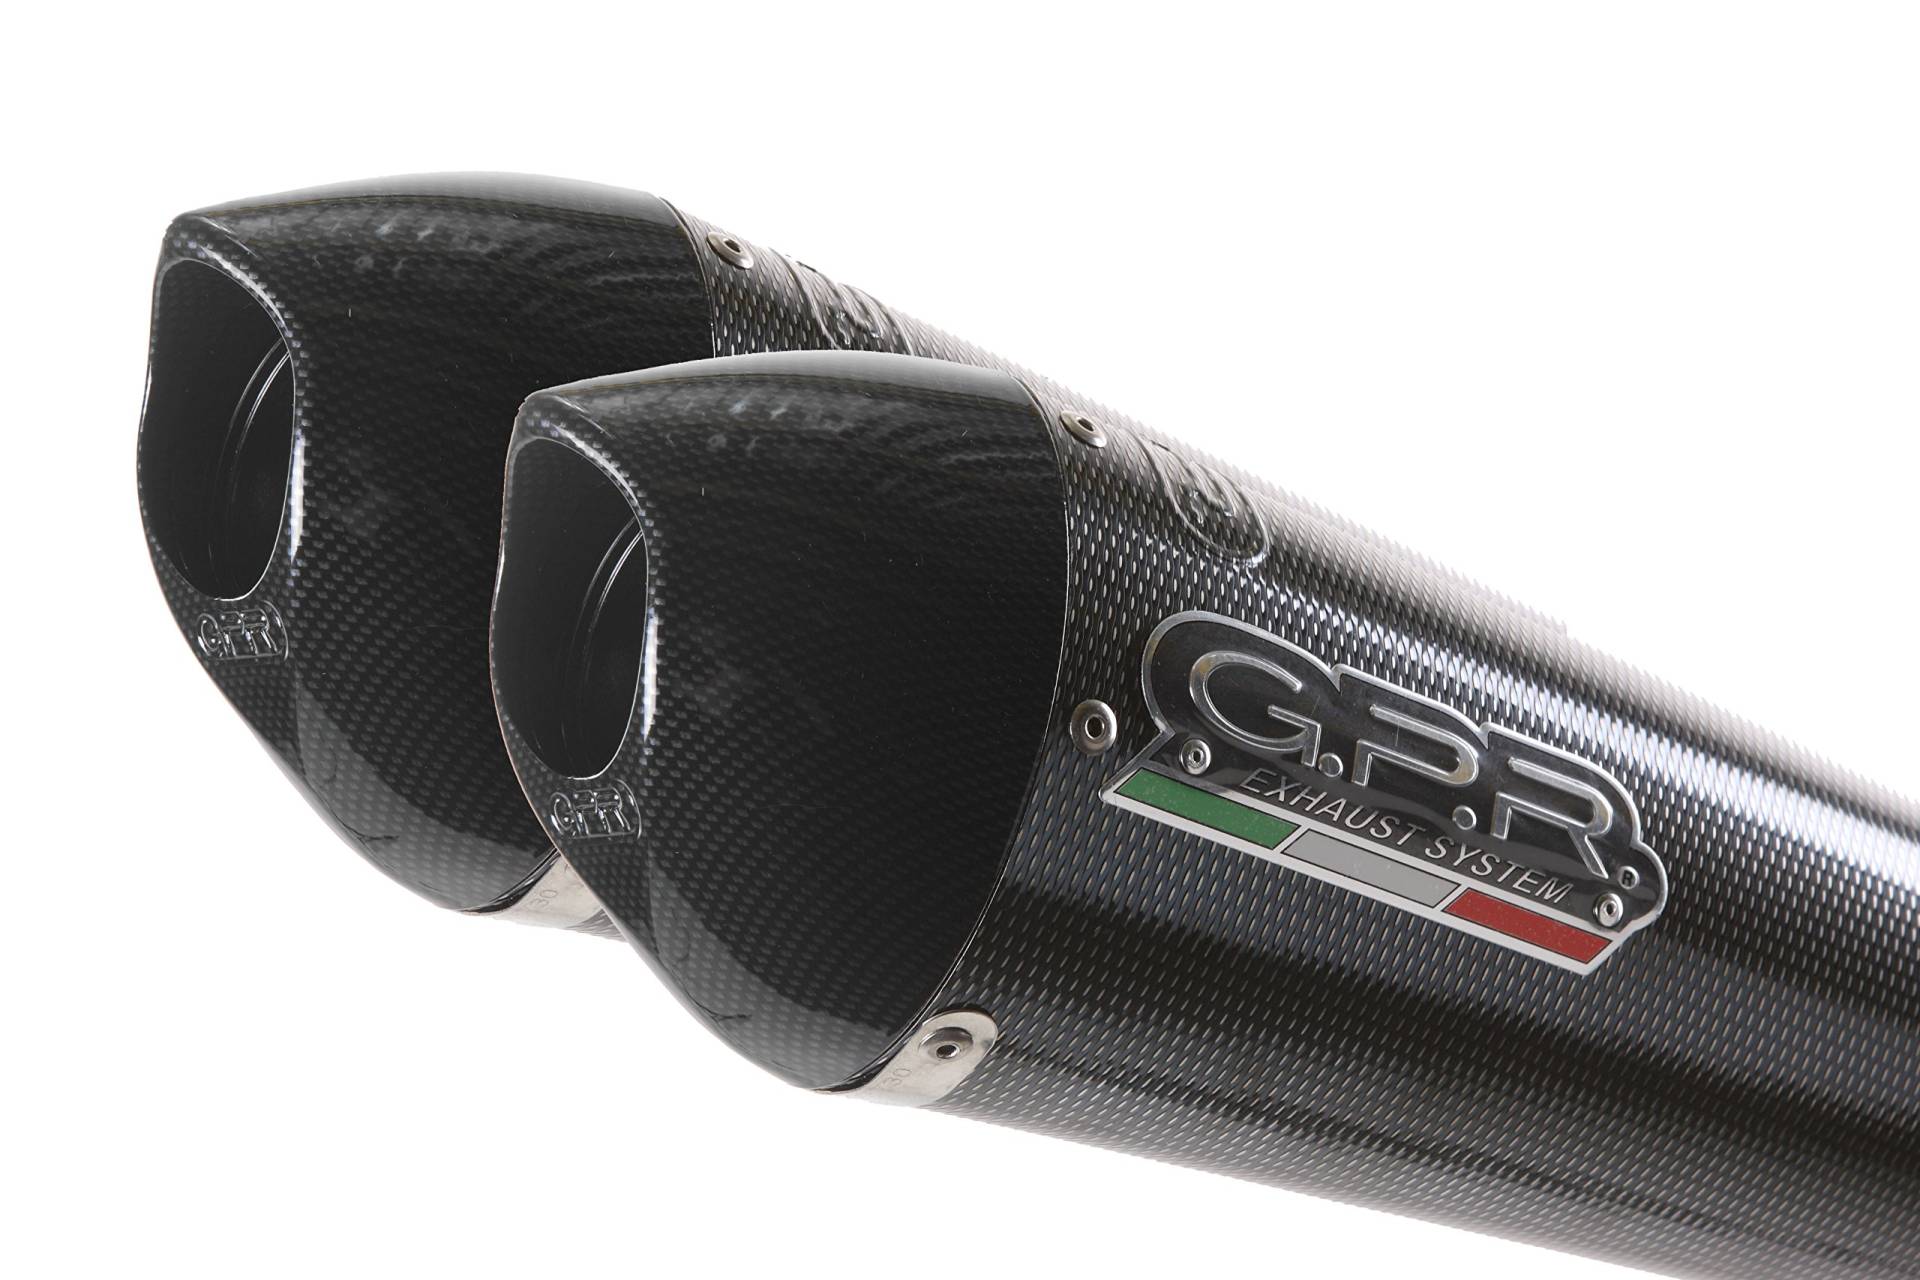 GPR Auspuff Endkappe – Ducati Monster 1000 2003/05 Dual HOMOLOGATED Slip Exhaust System High Level by GPR Exhaust Systems der EVO Poppy Line von GPR EXHAUST SYSTEM